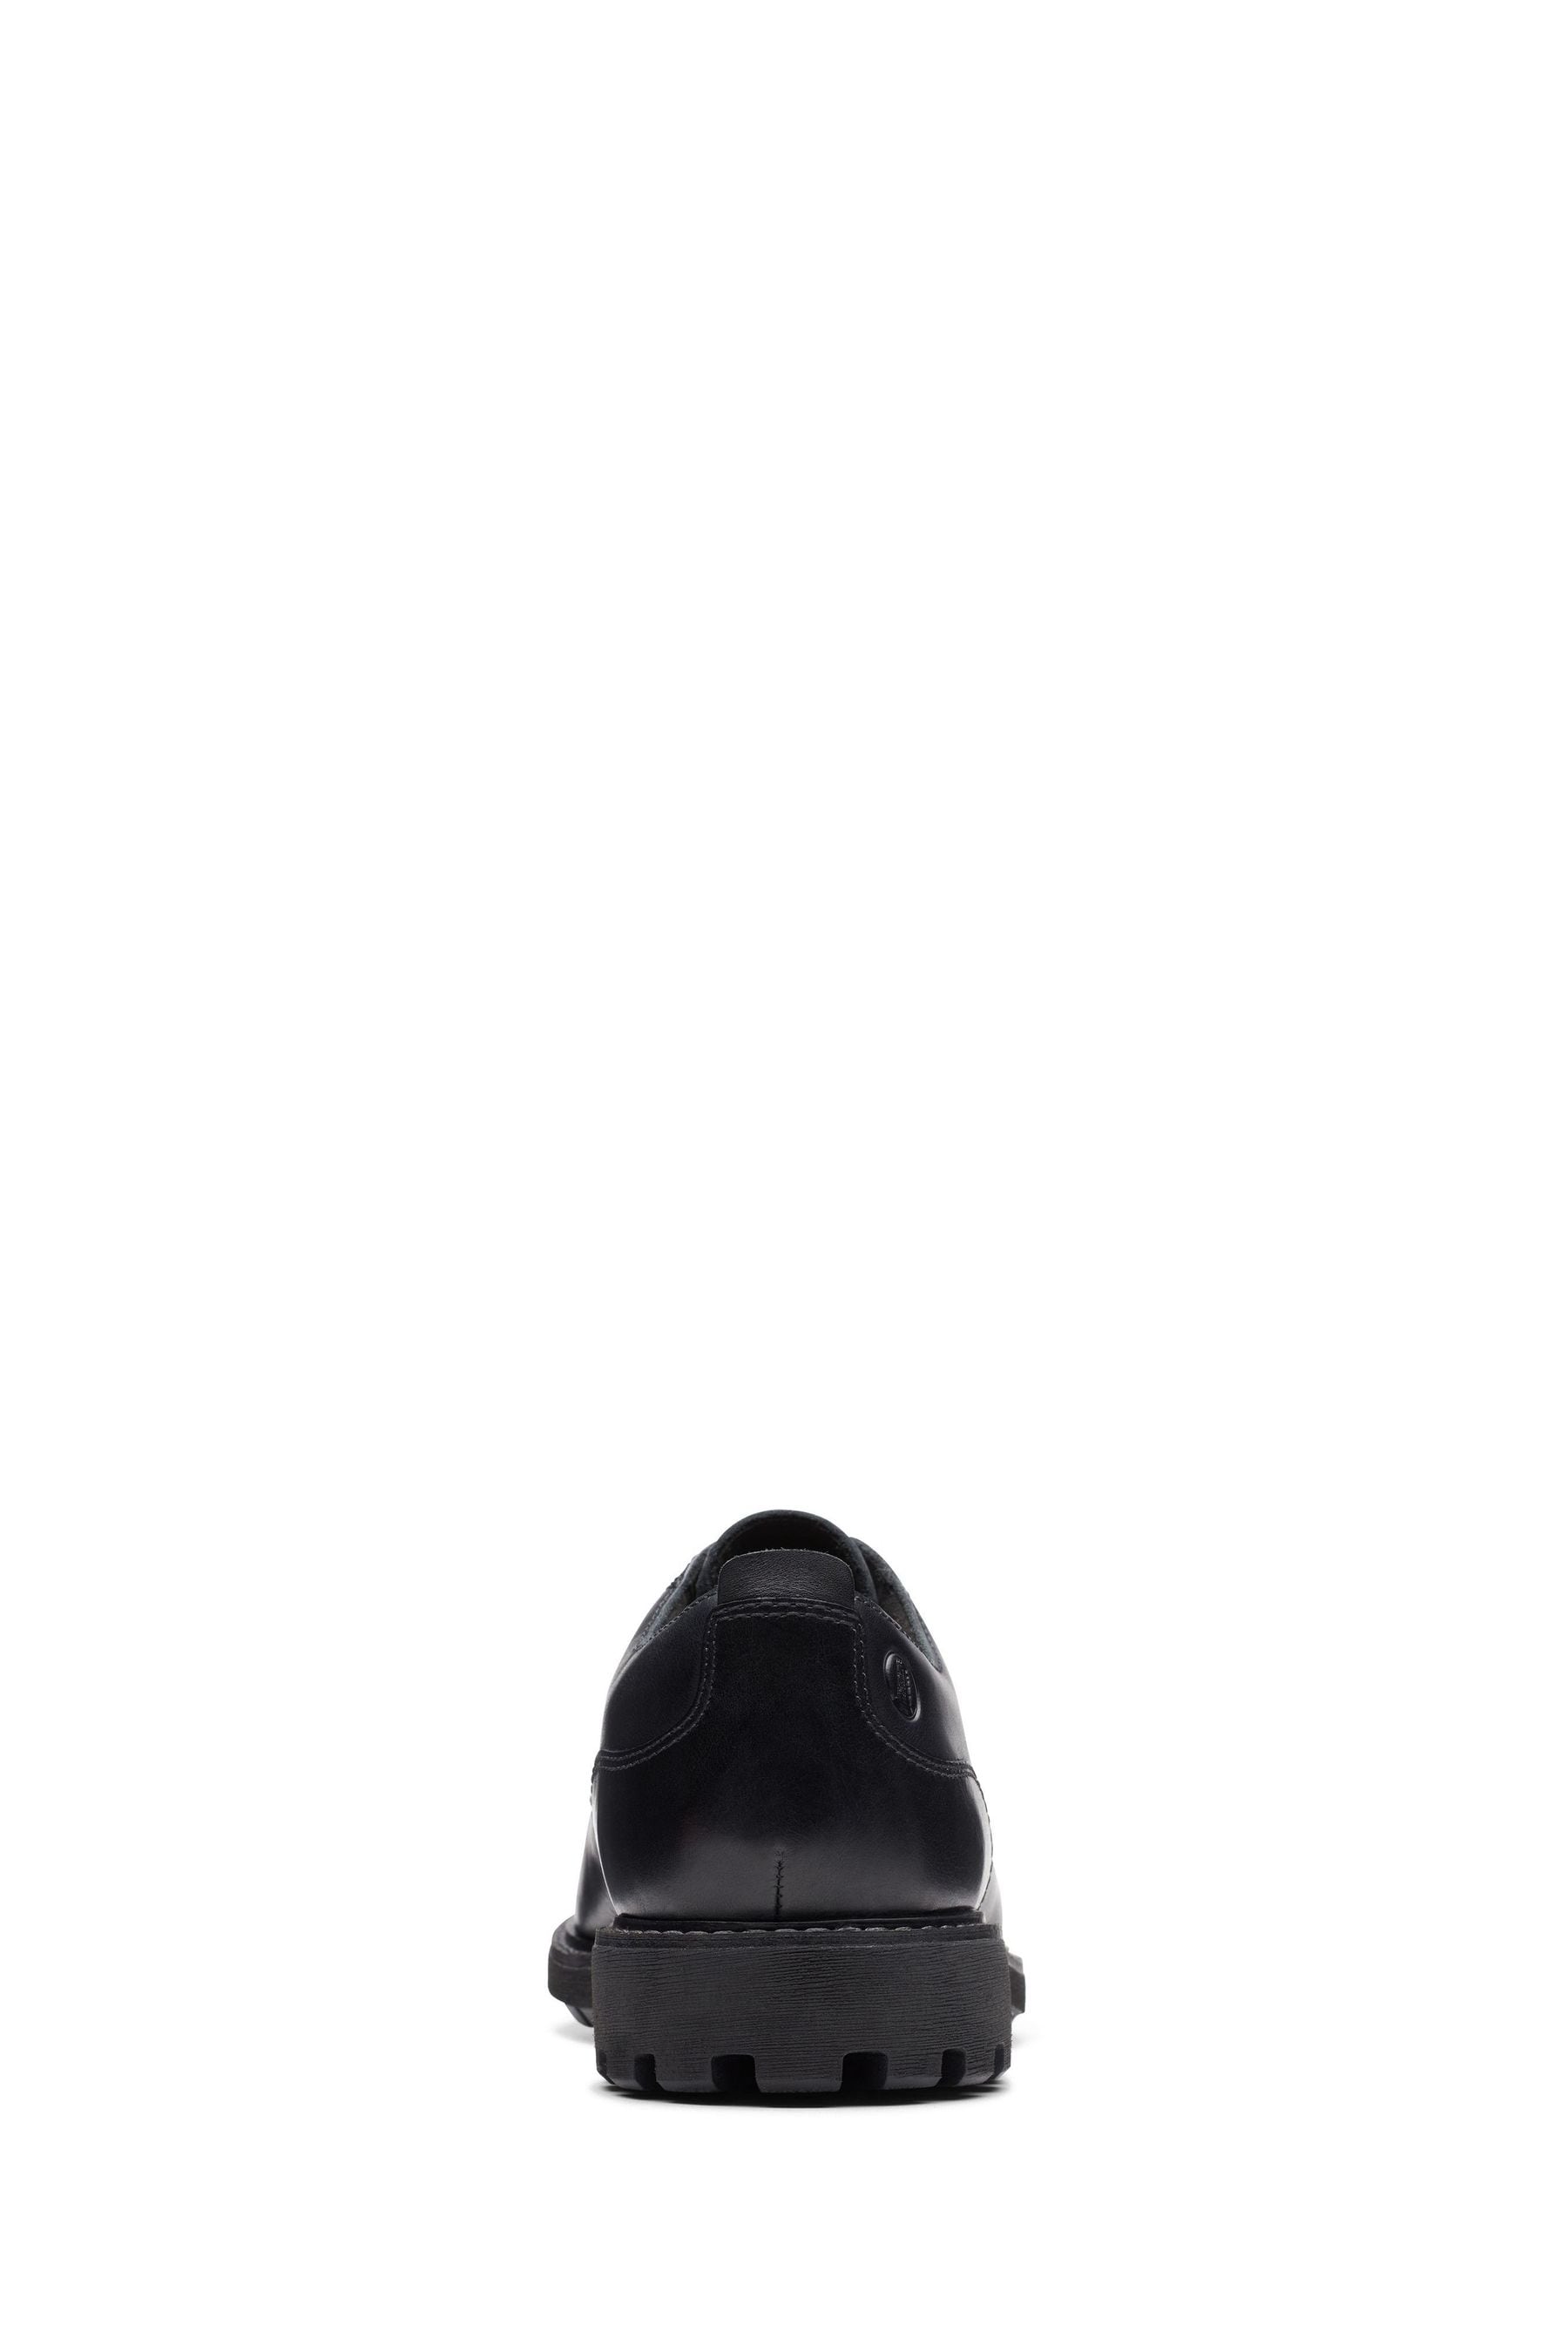 Buy Clarks Black Leather Batcombe Tie Shoes from the Next UK online shop